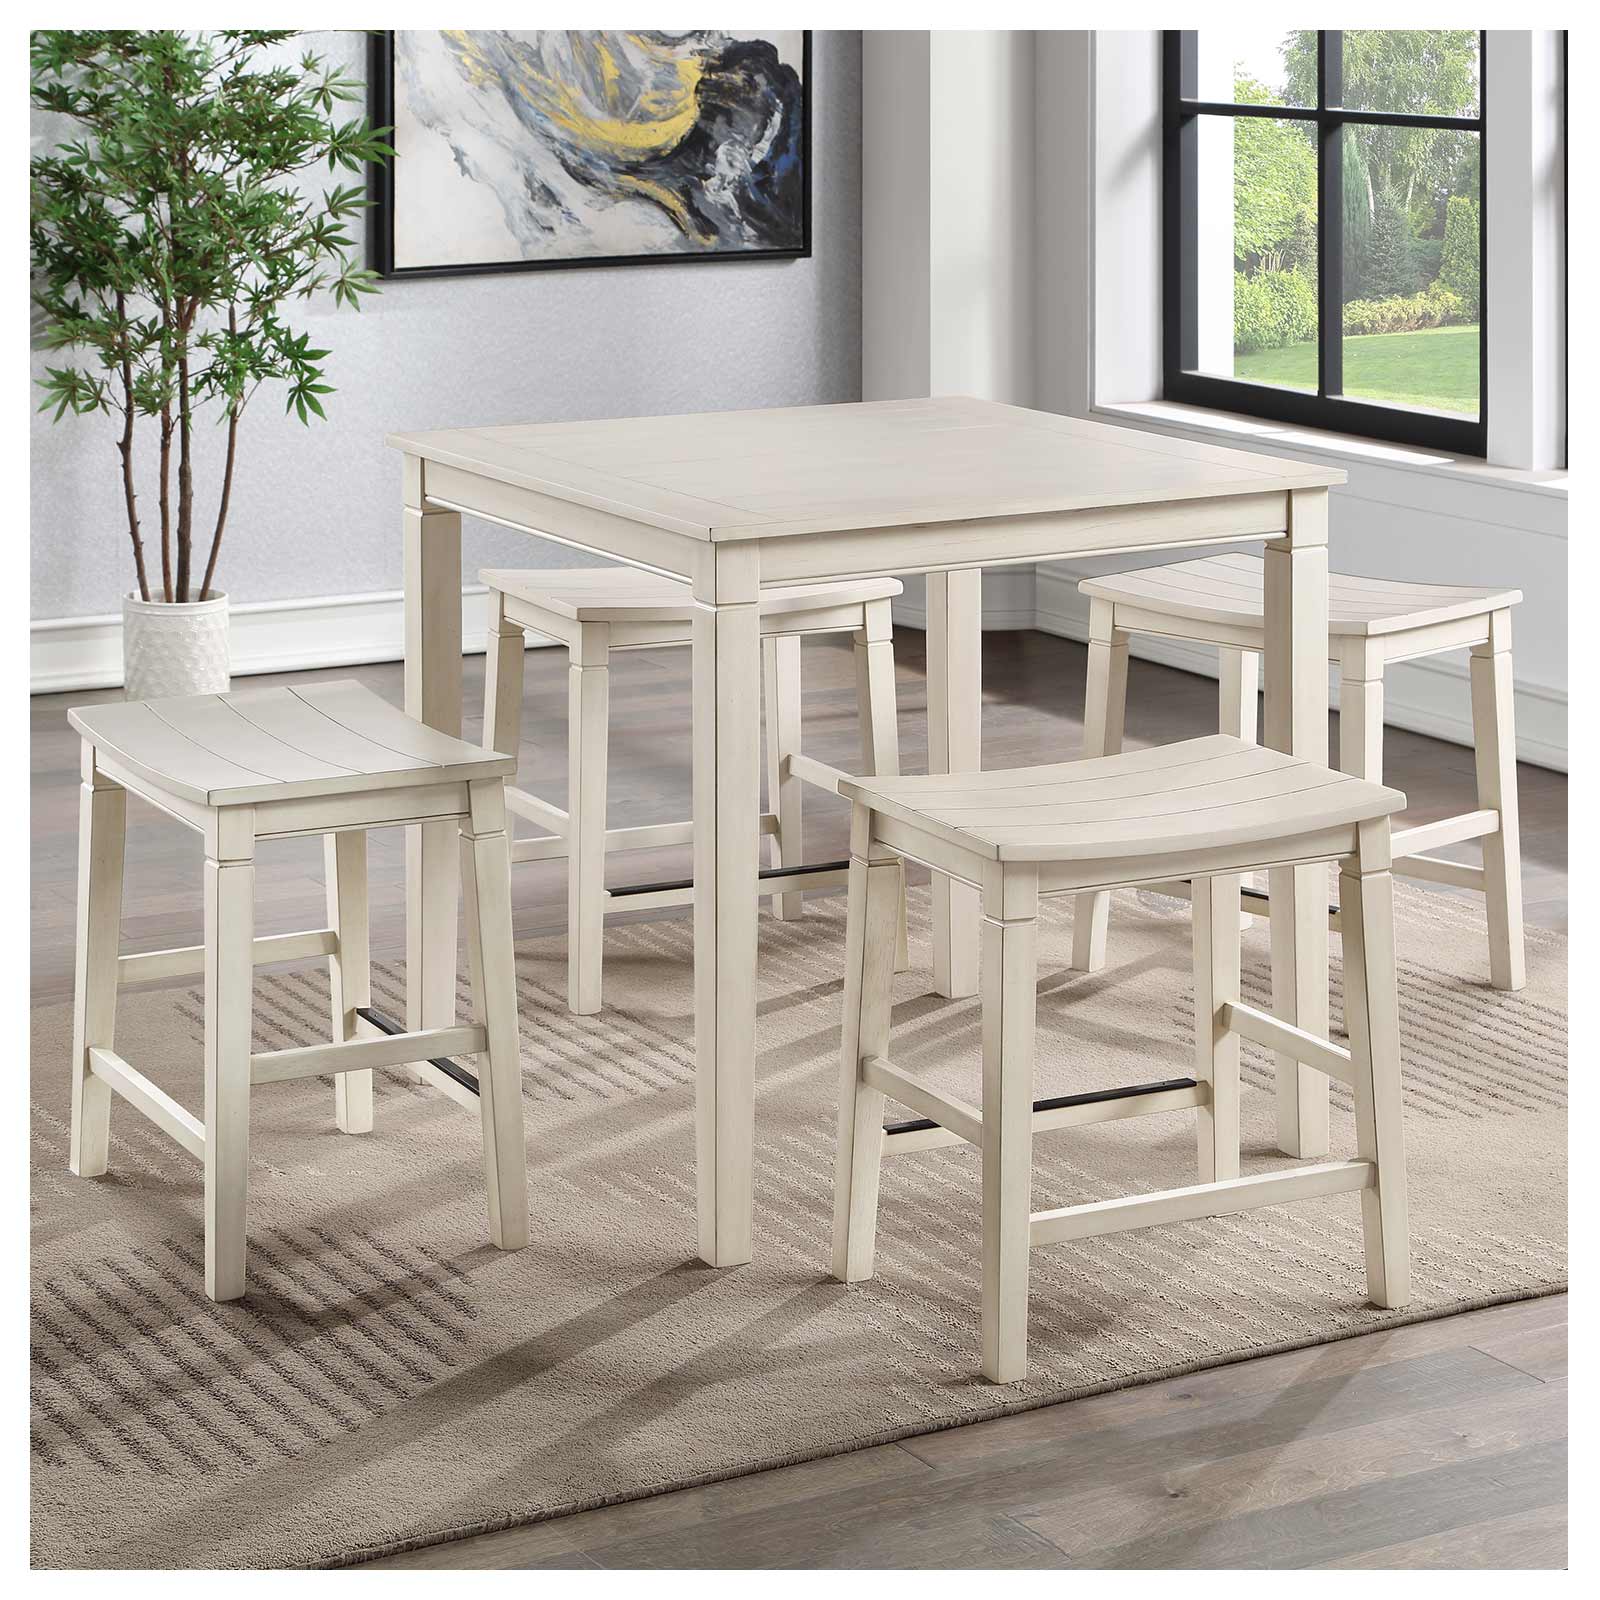 Steve Silver Co. Westlake White Counter Table & 4 Counter Stools